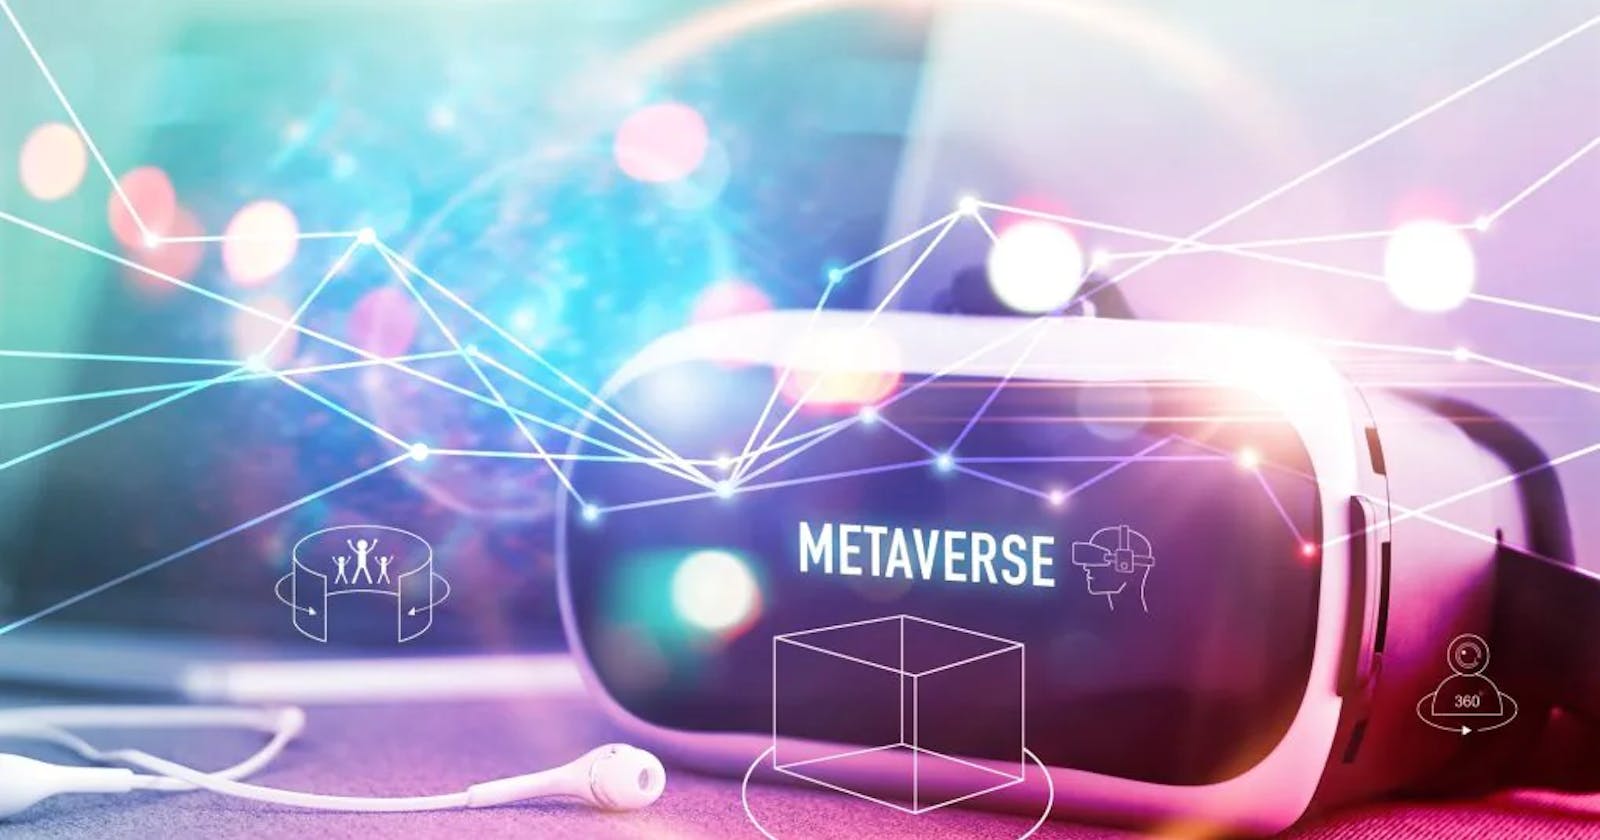 How the Metaverse will evolve in the future